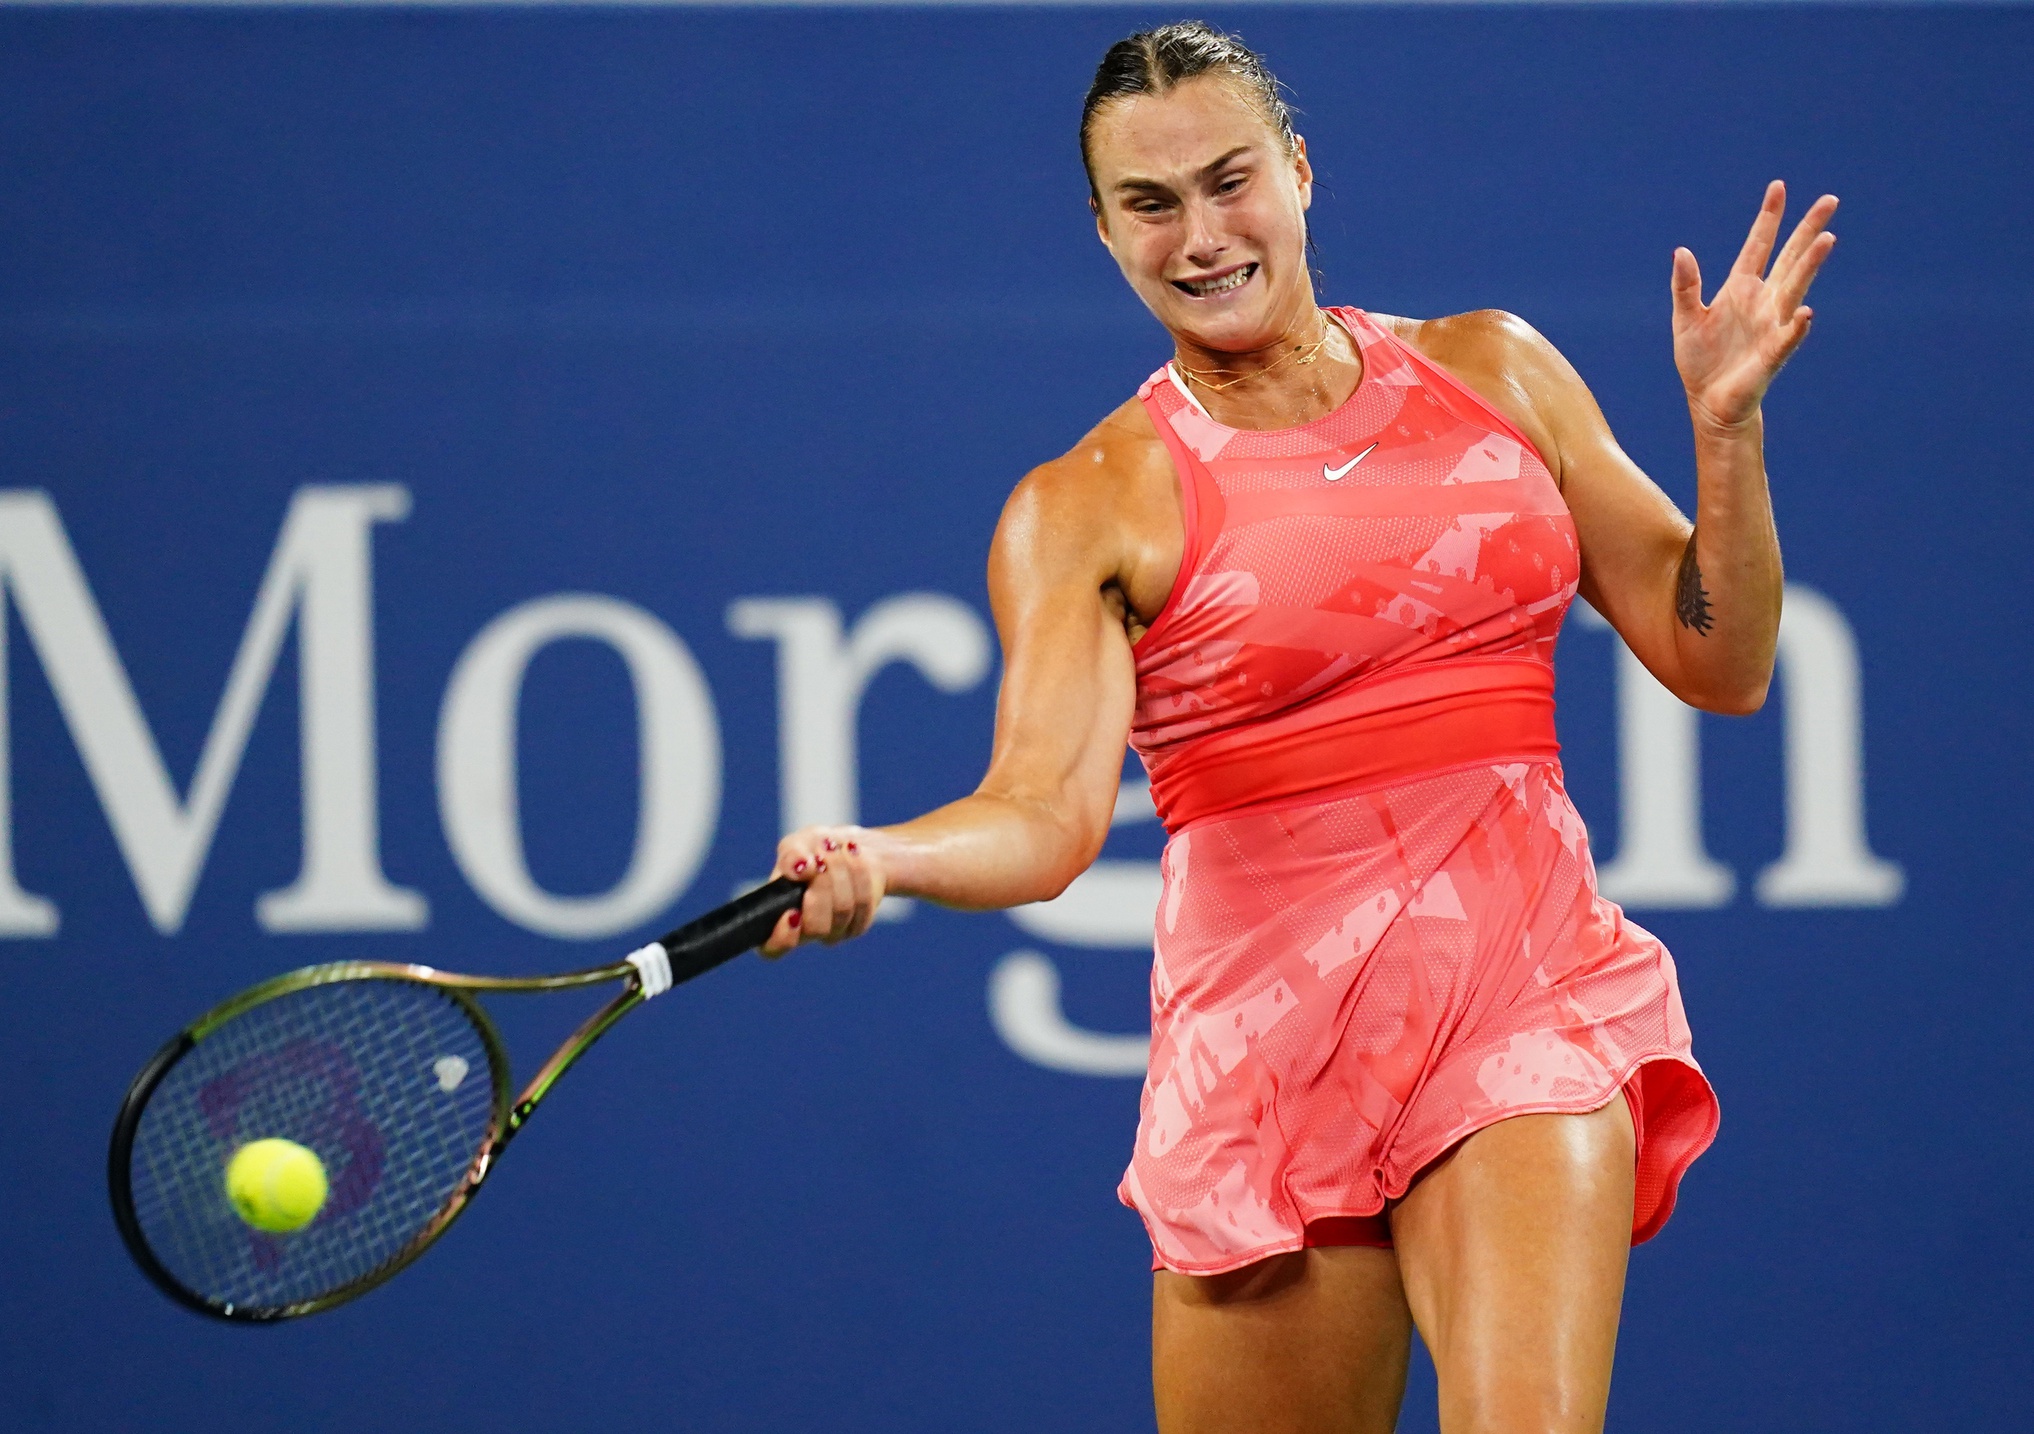 Aryna Sabalenka in action at the US Open.